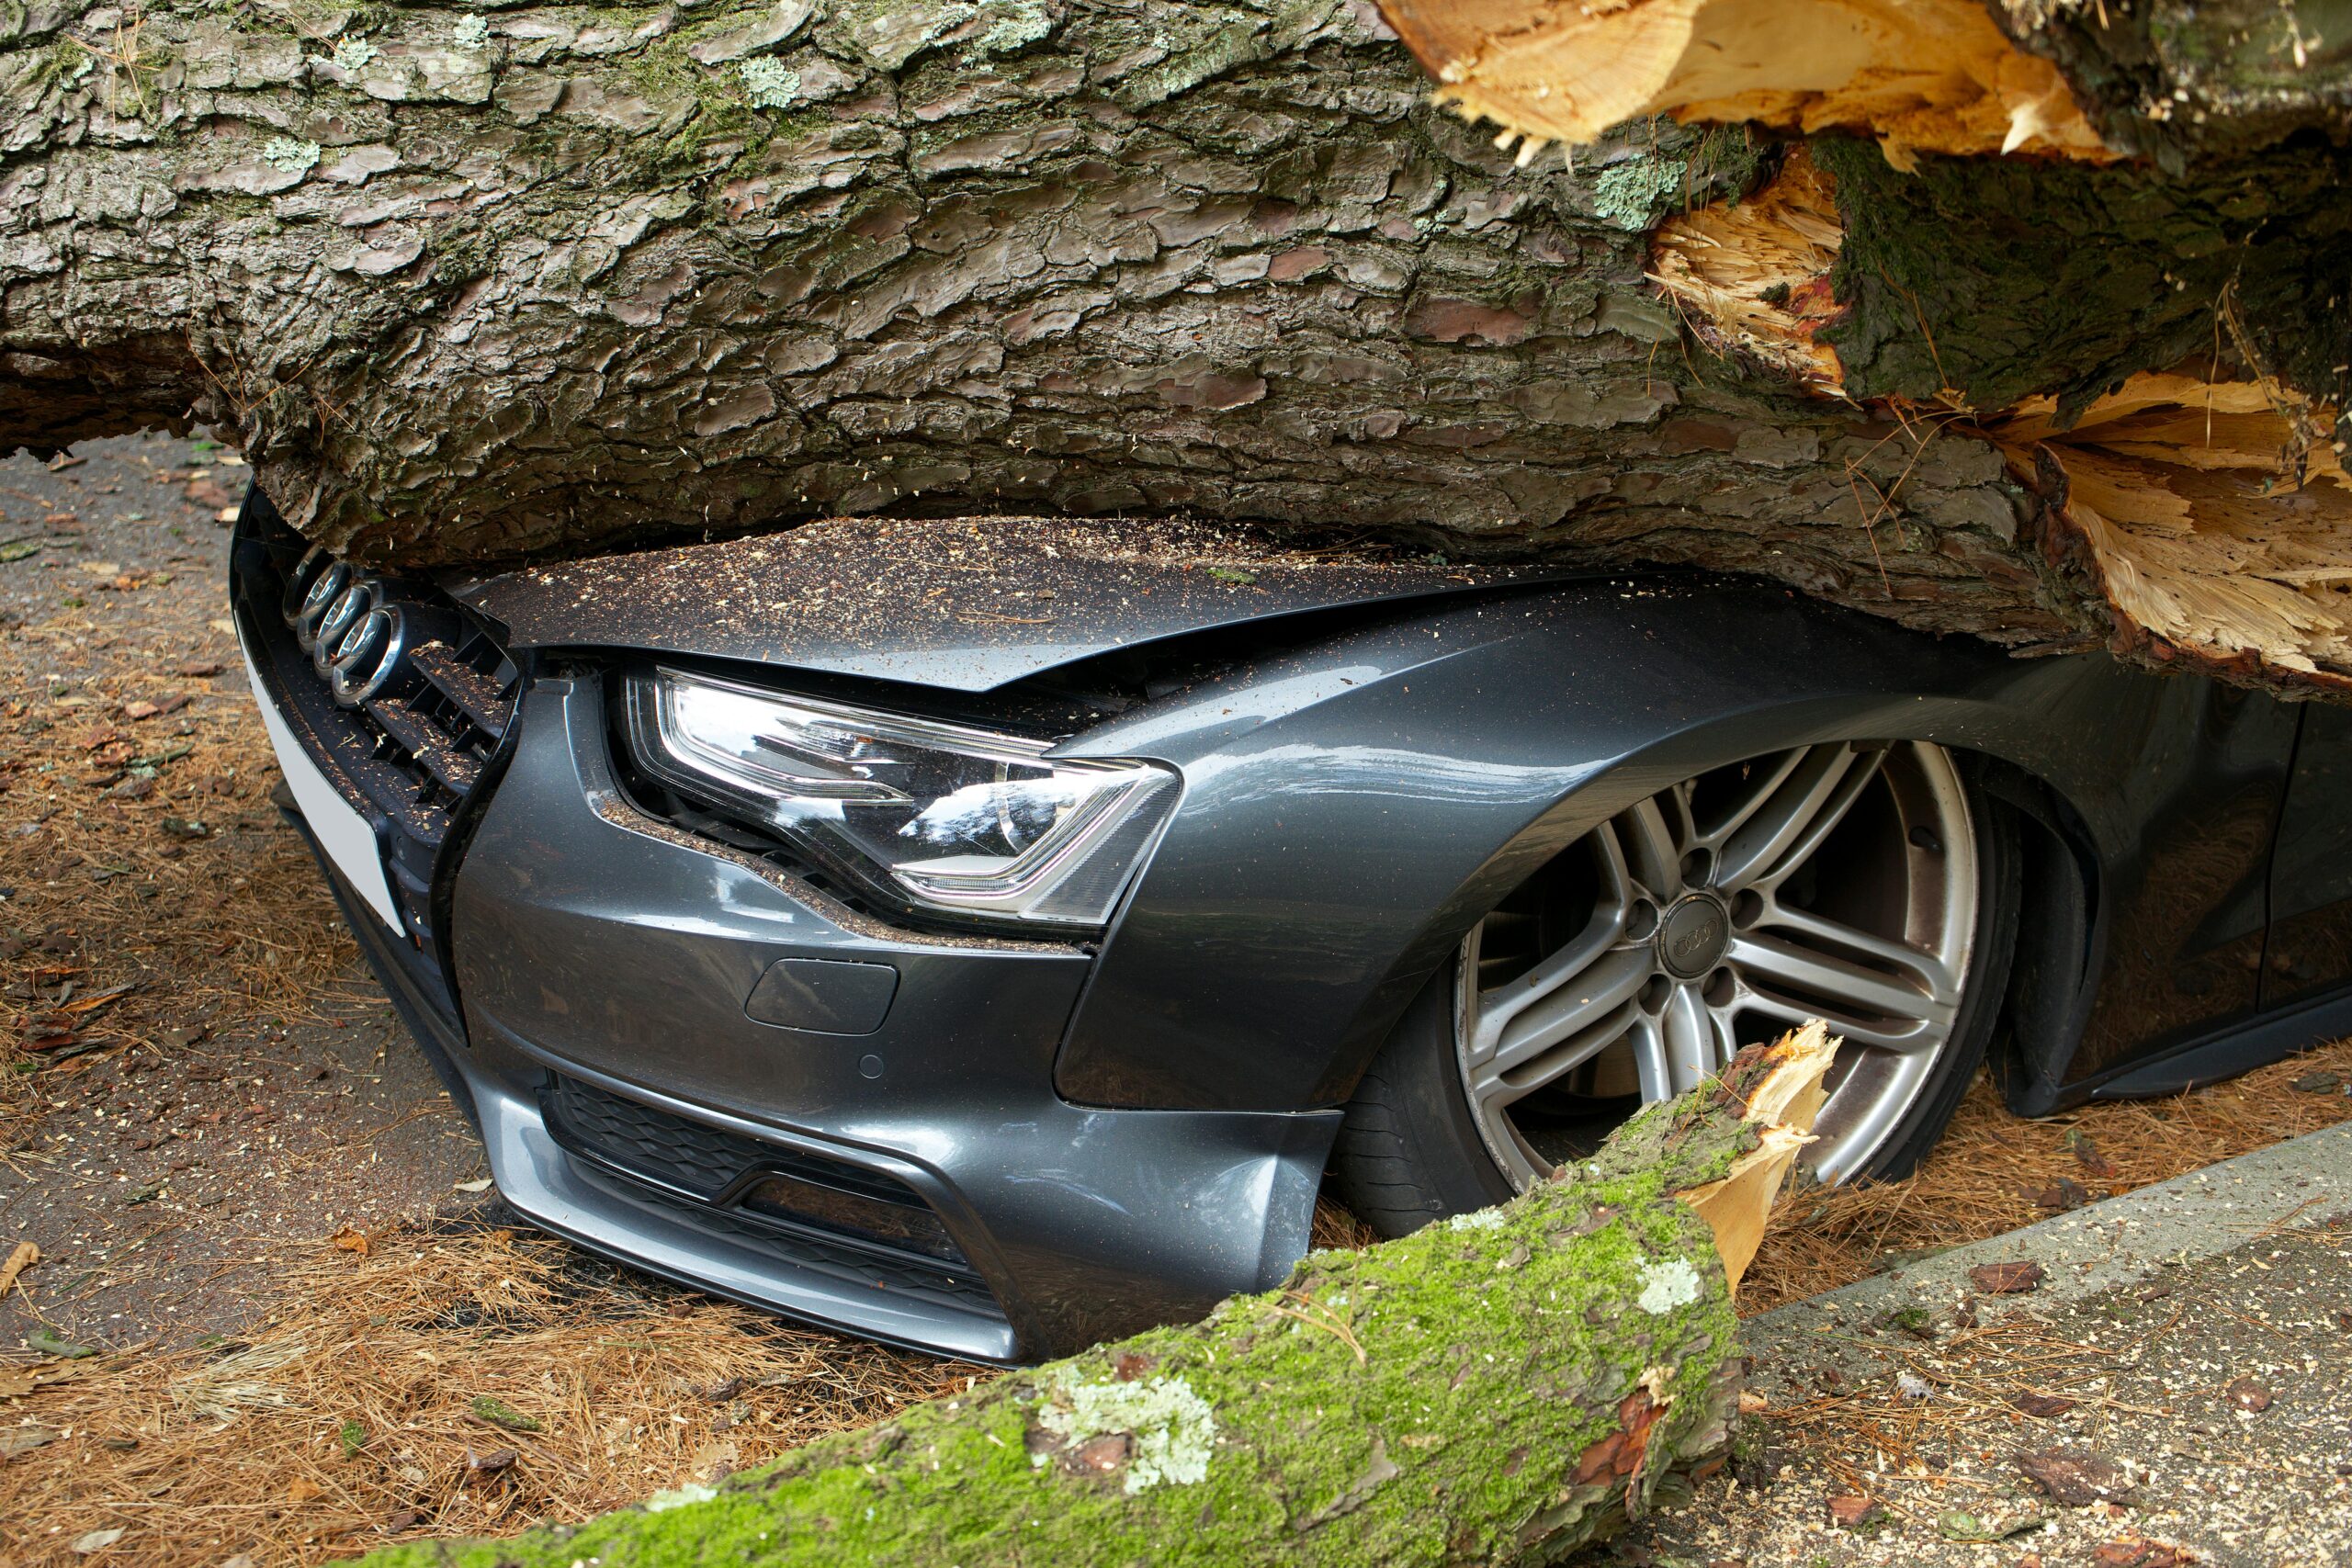 The bonnet of a car crushed by a tree on a sidewalk.